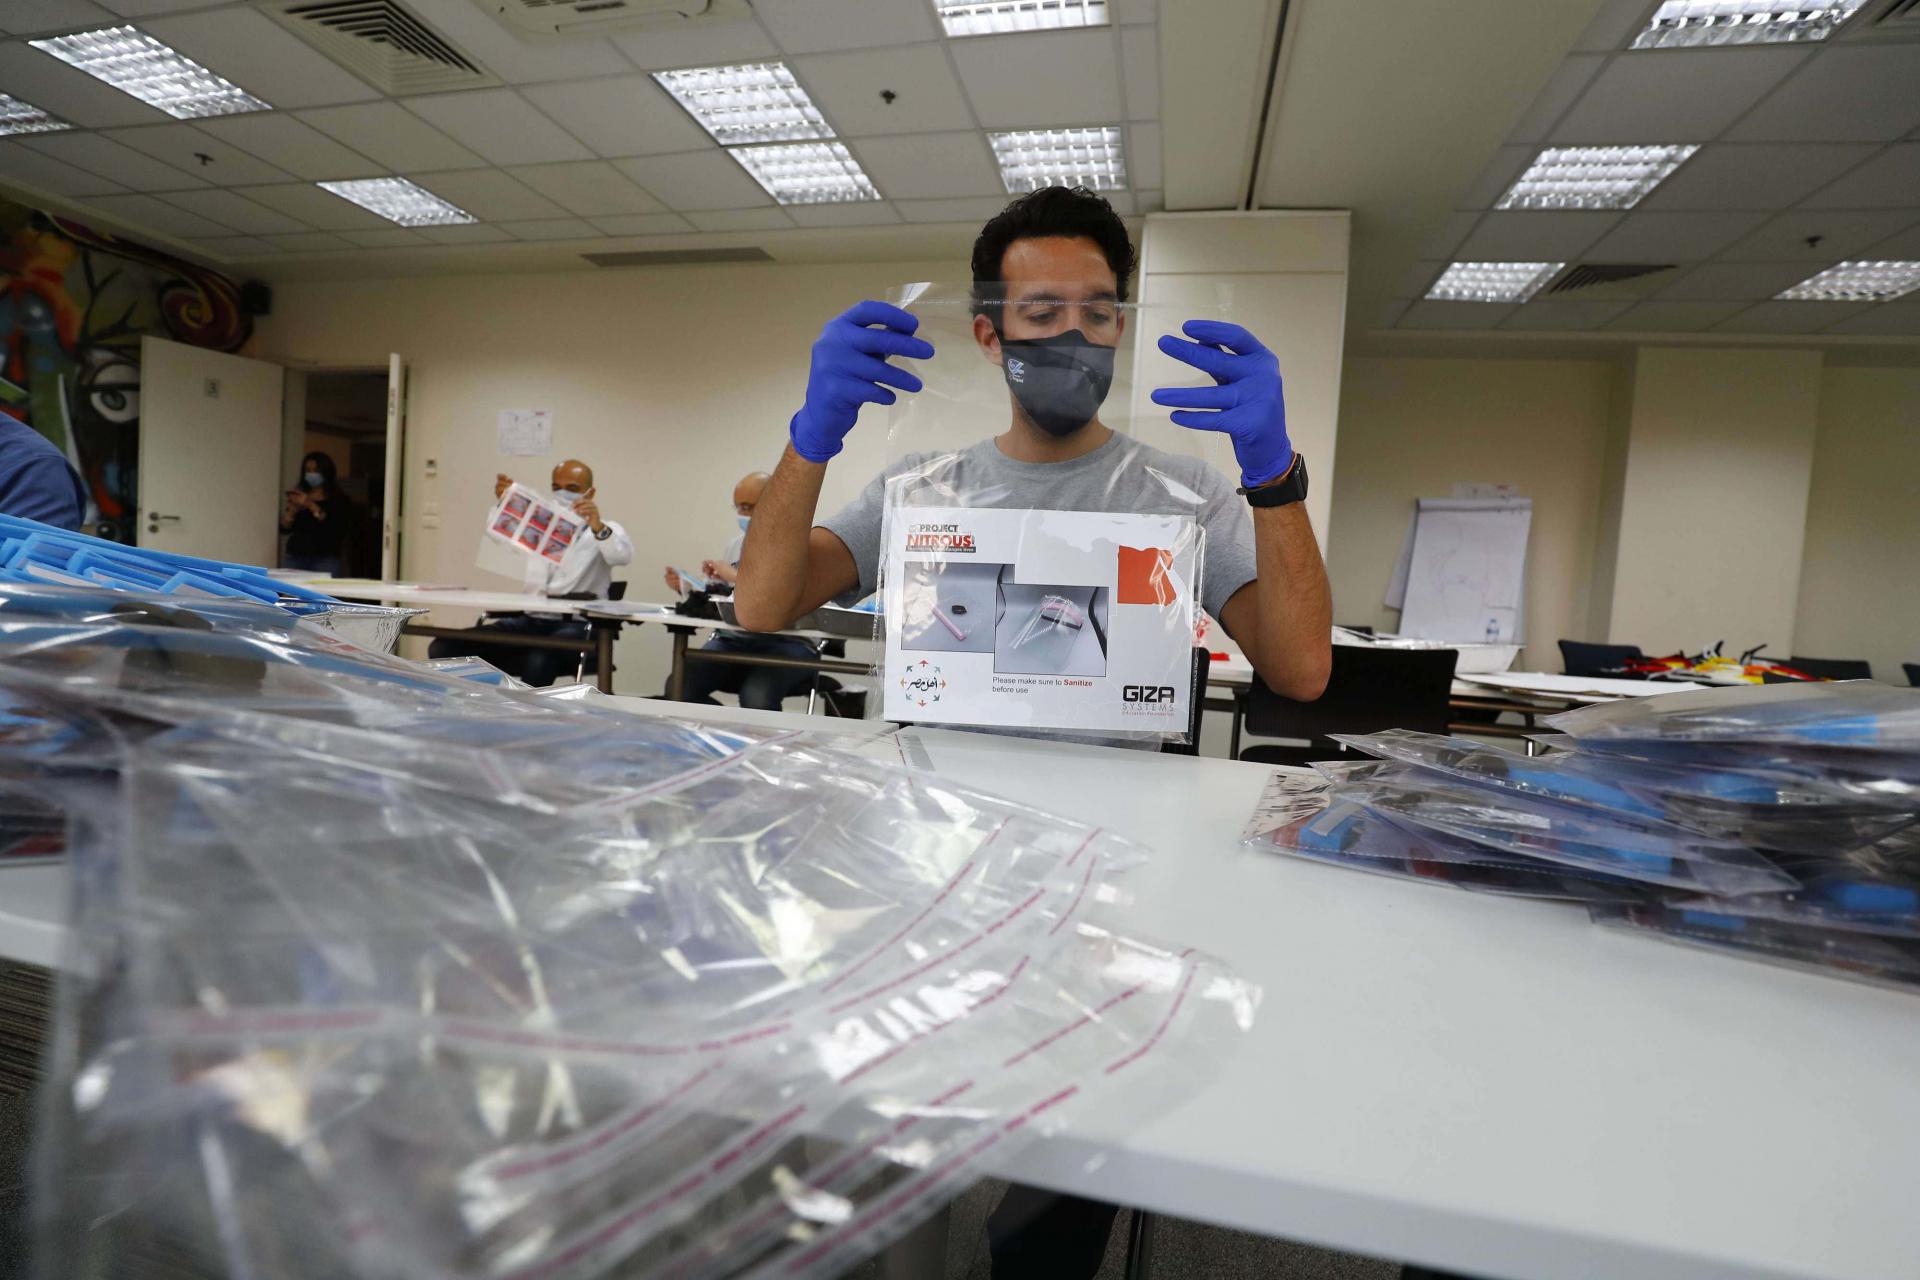 The firm is now distributing around 2,000 face shields a day to medics nationwide